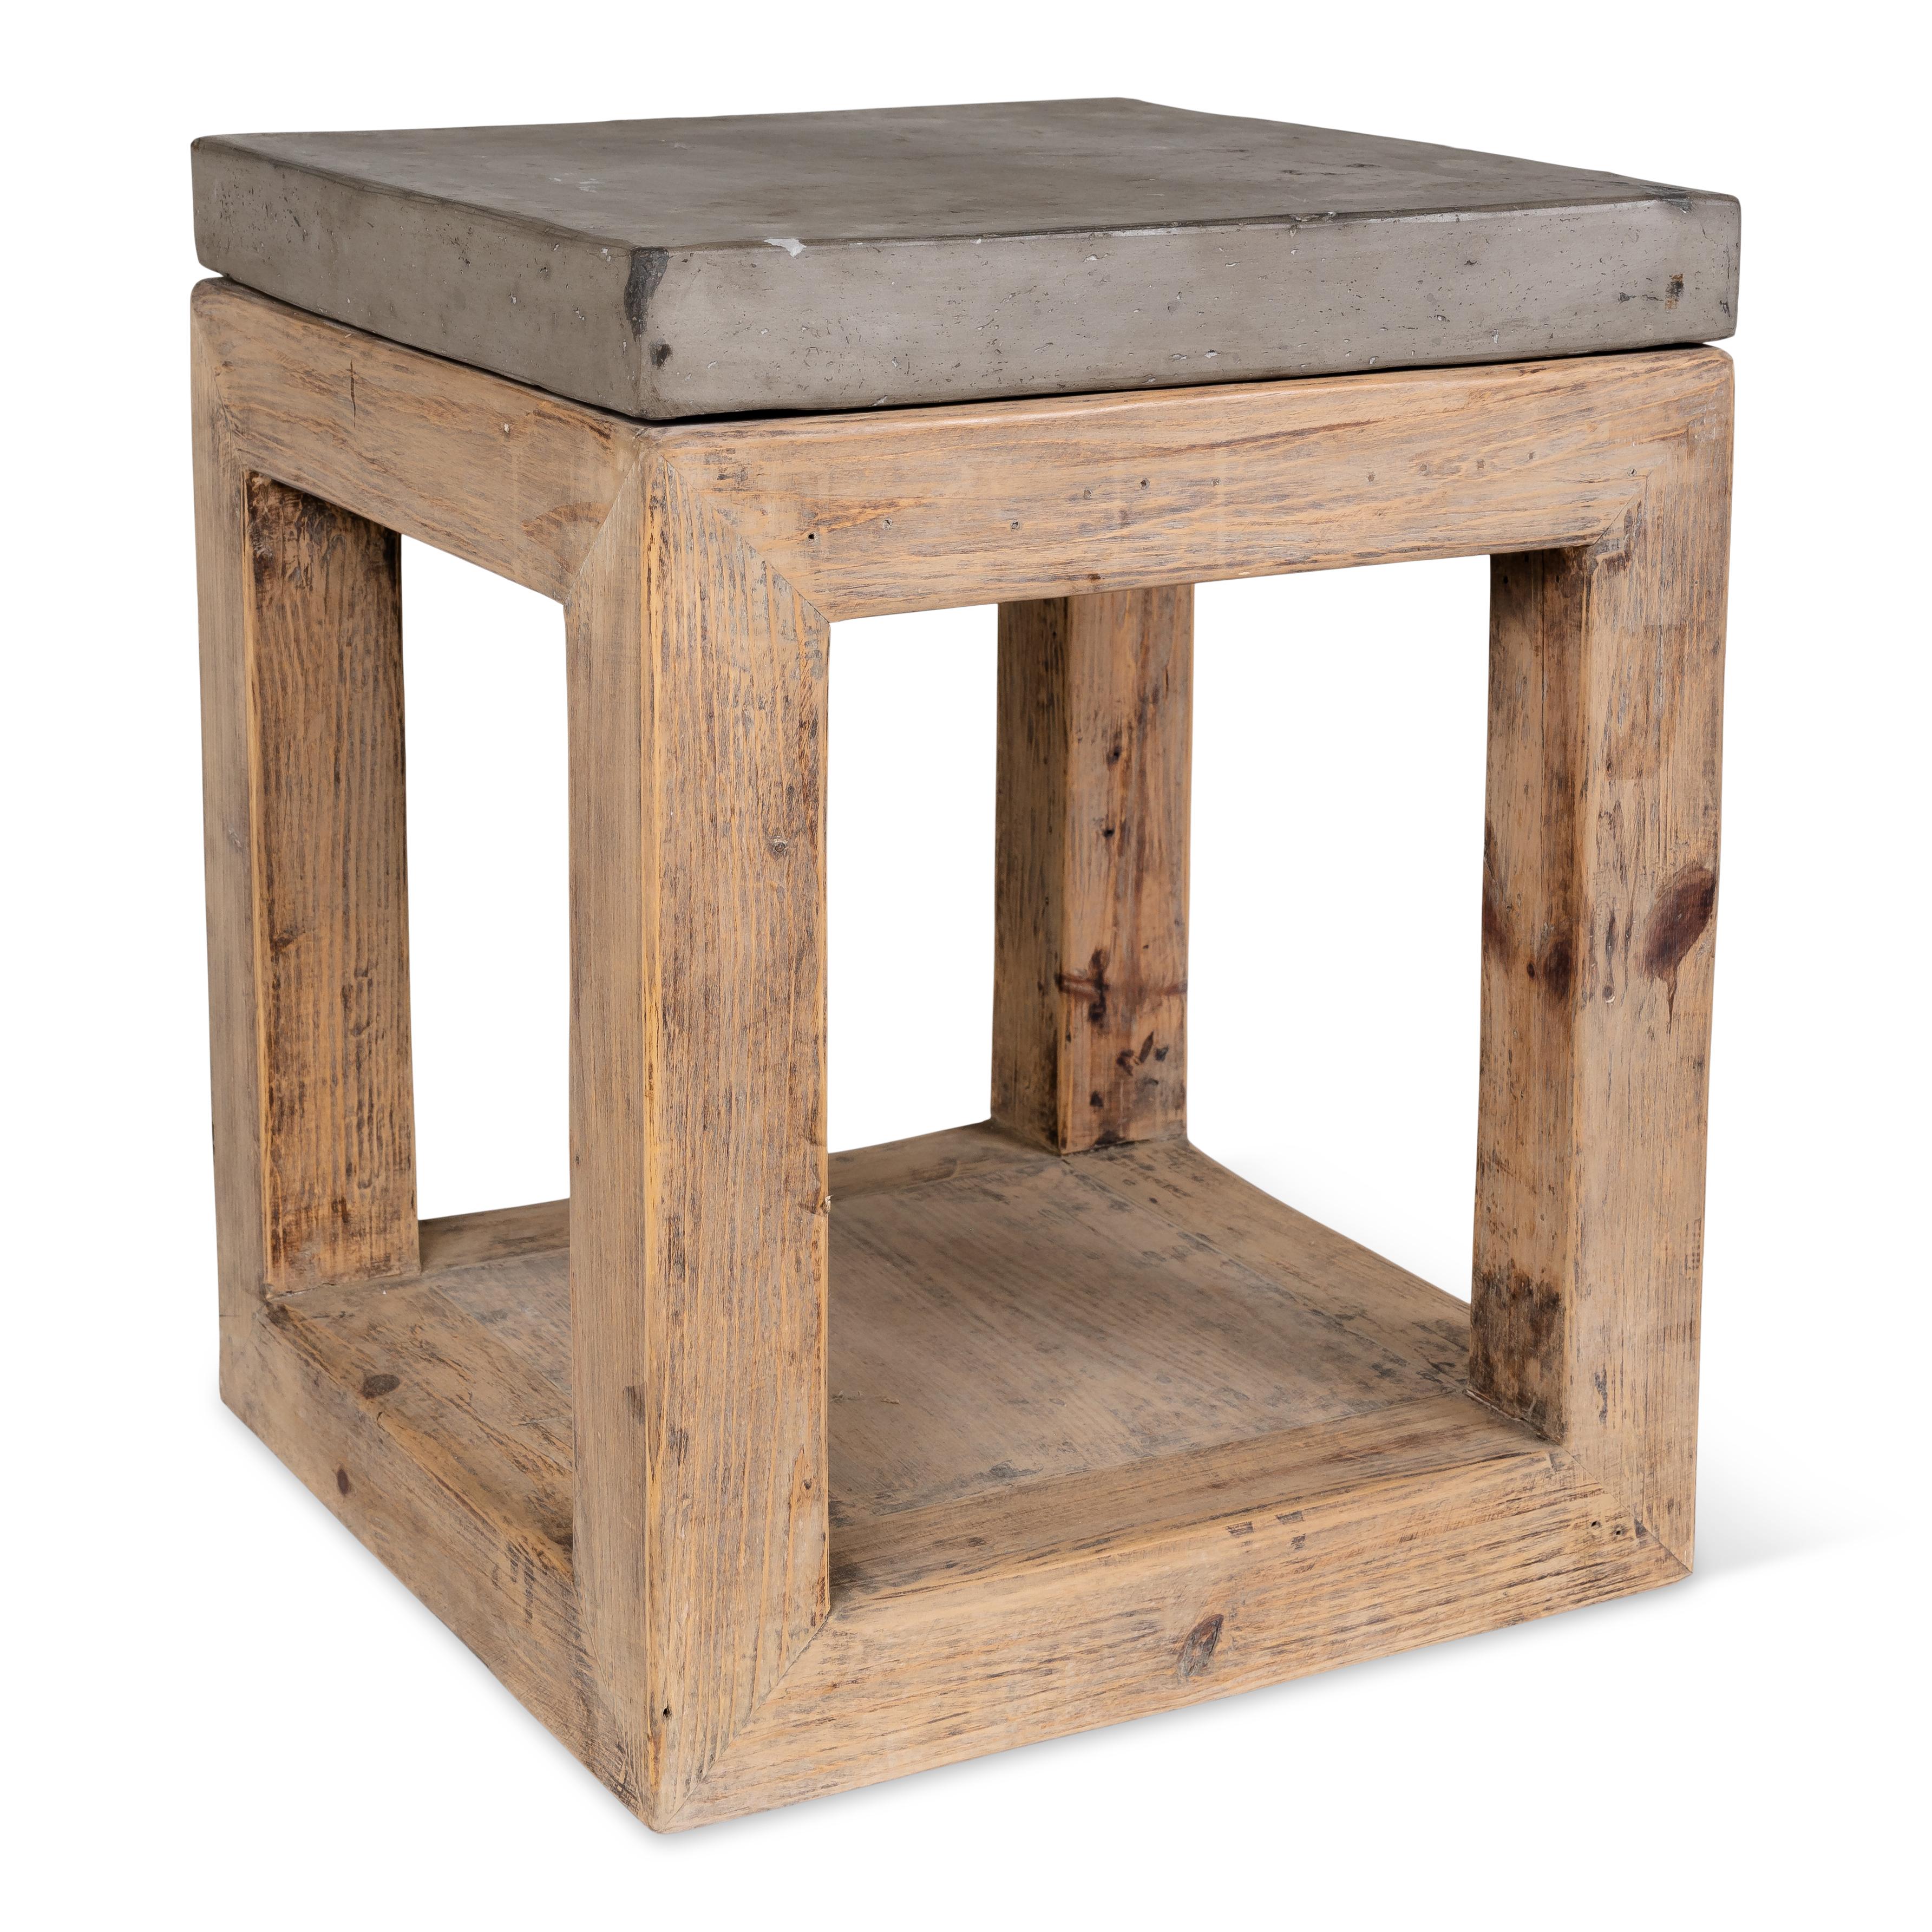 Geometric form elm end table with cast concrete top

Piece from our one of kind collection, Le Monde. Exclusive to Brendan Bass. 


Globally curated by Brendan Bass, Le Monde furniture and accessories offer modern sensibility, provincial